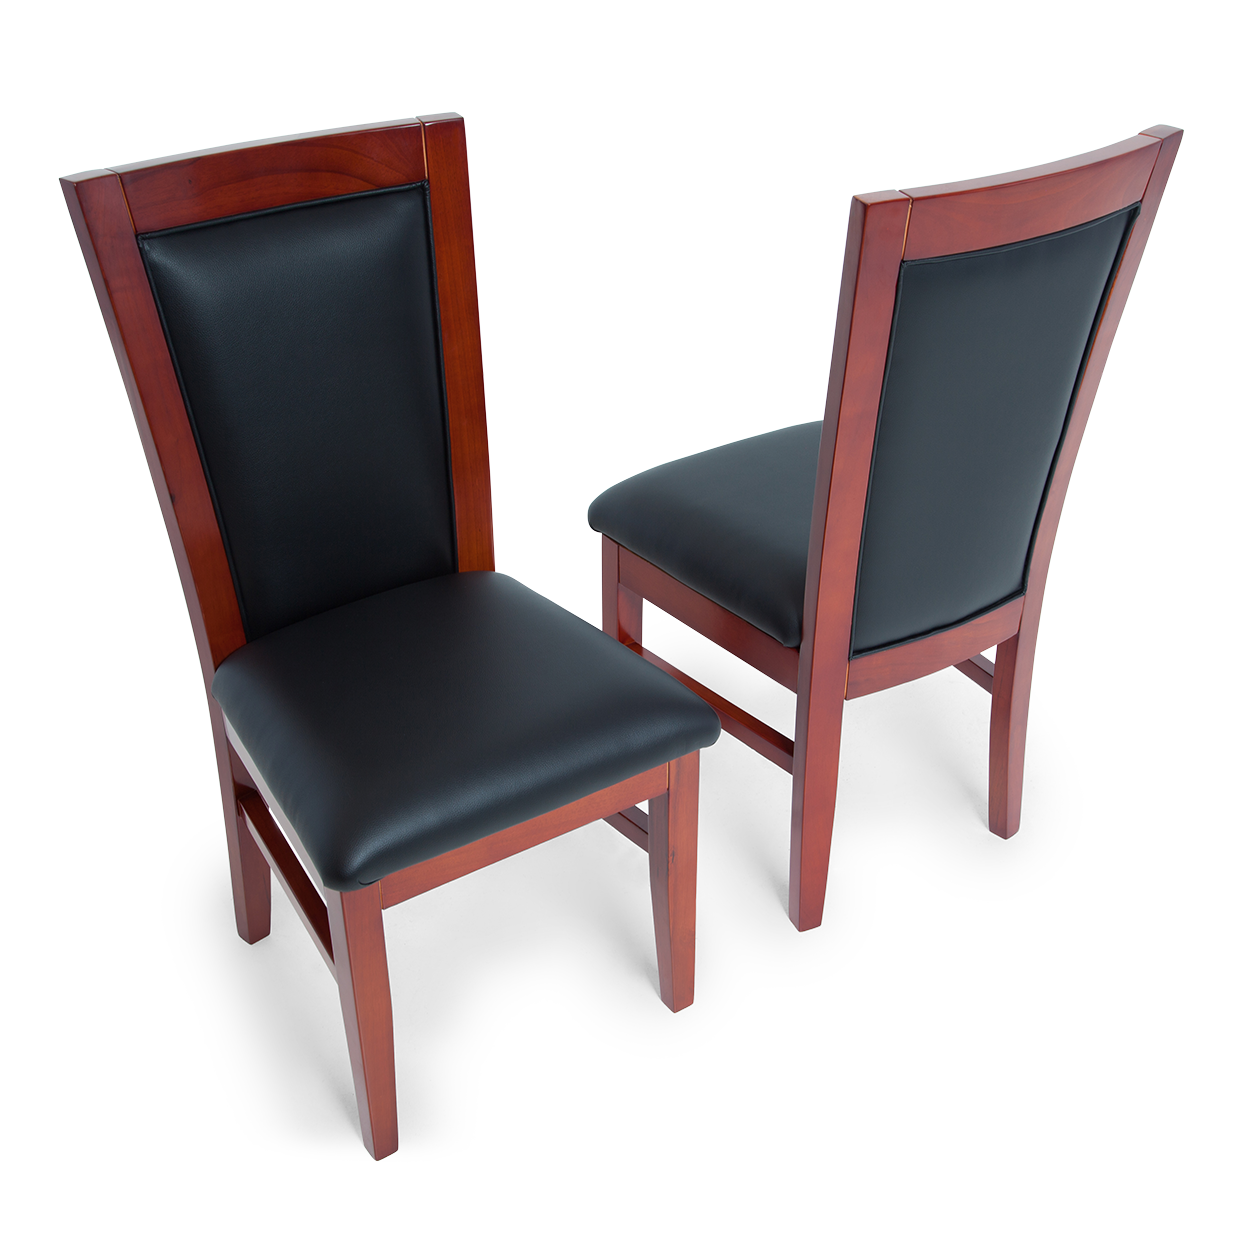 BBO Poker Tables "Set of 2" Classic Poker Table Chair